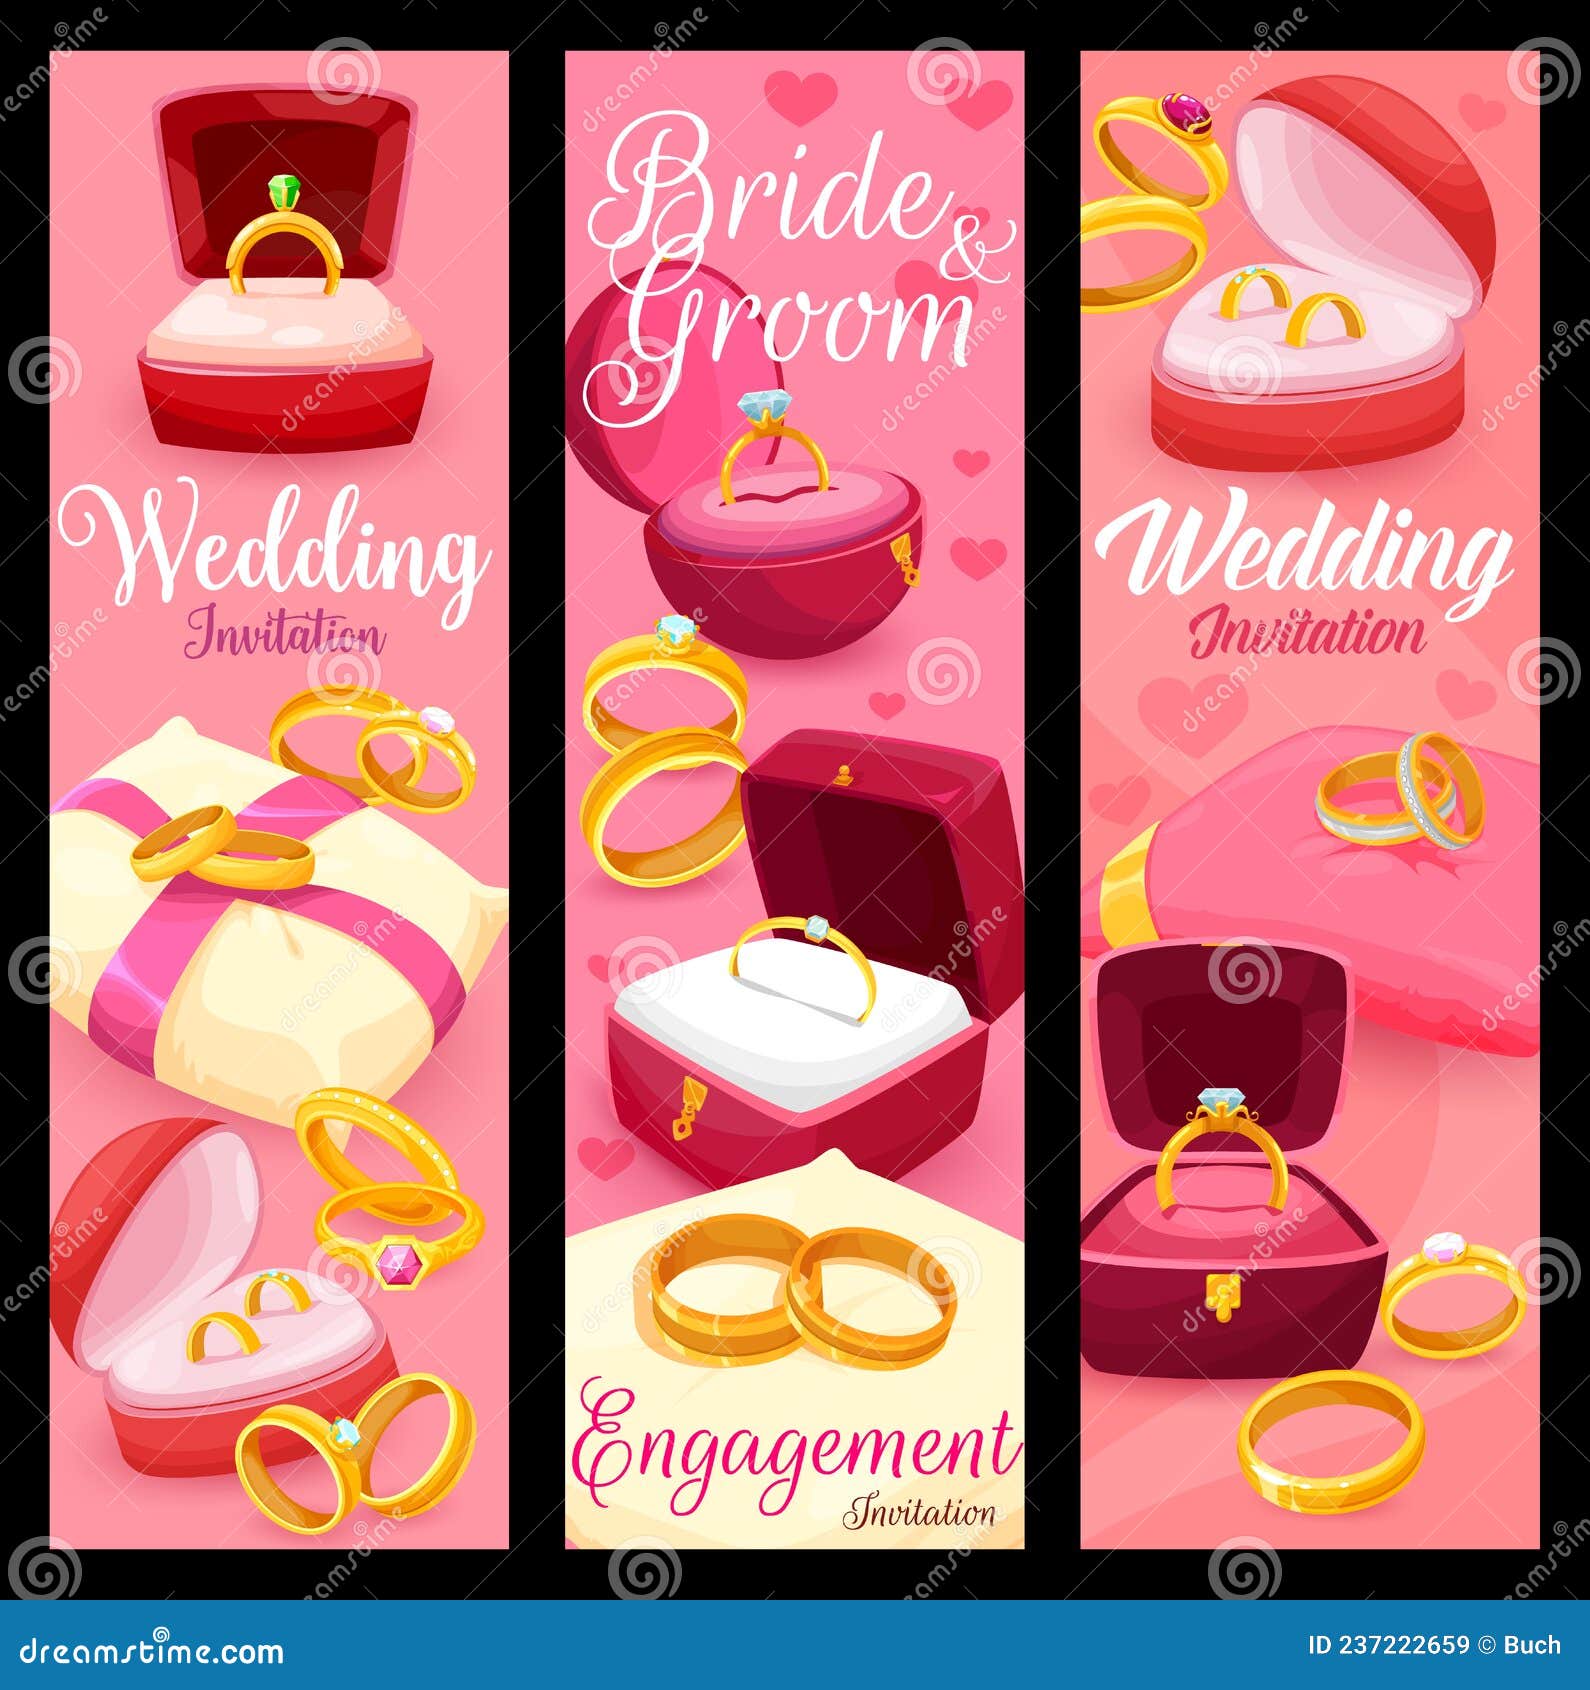 Gold wedding ring set ceremony and anniversary Vector Image